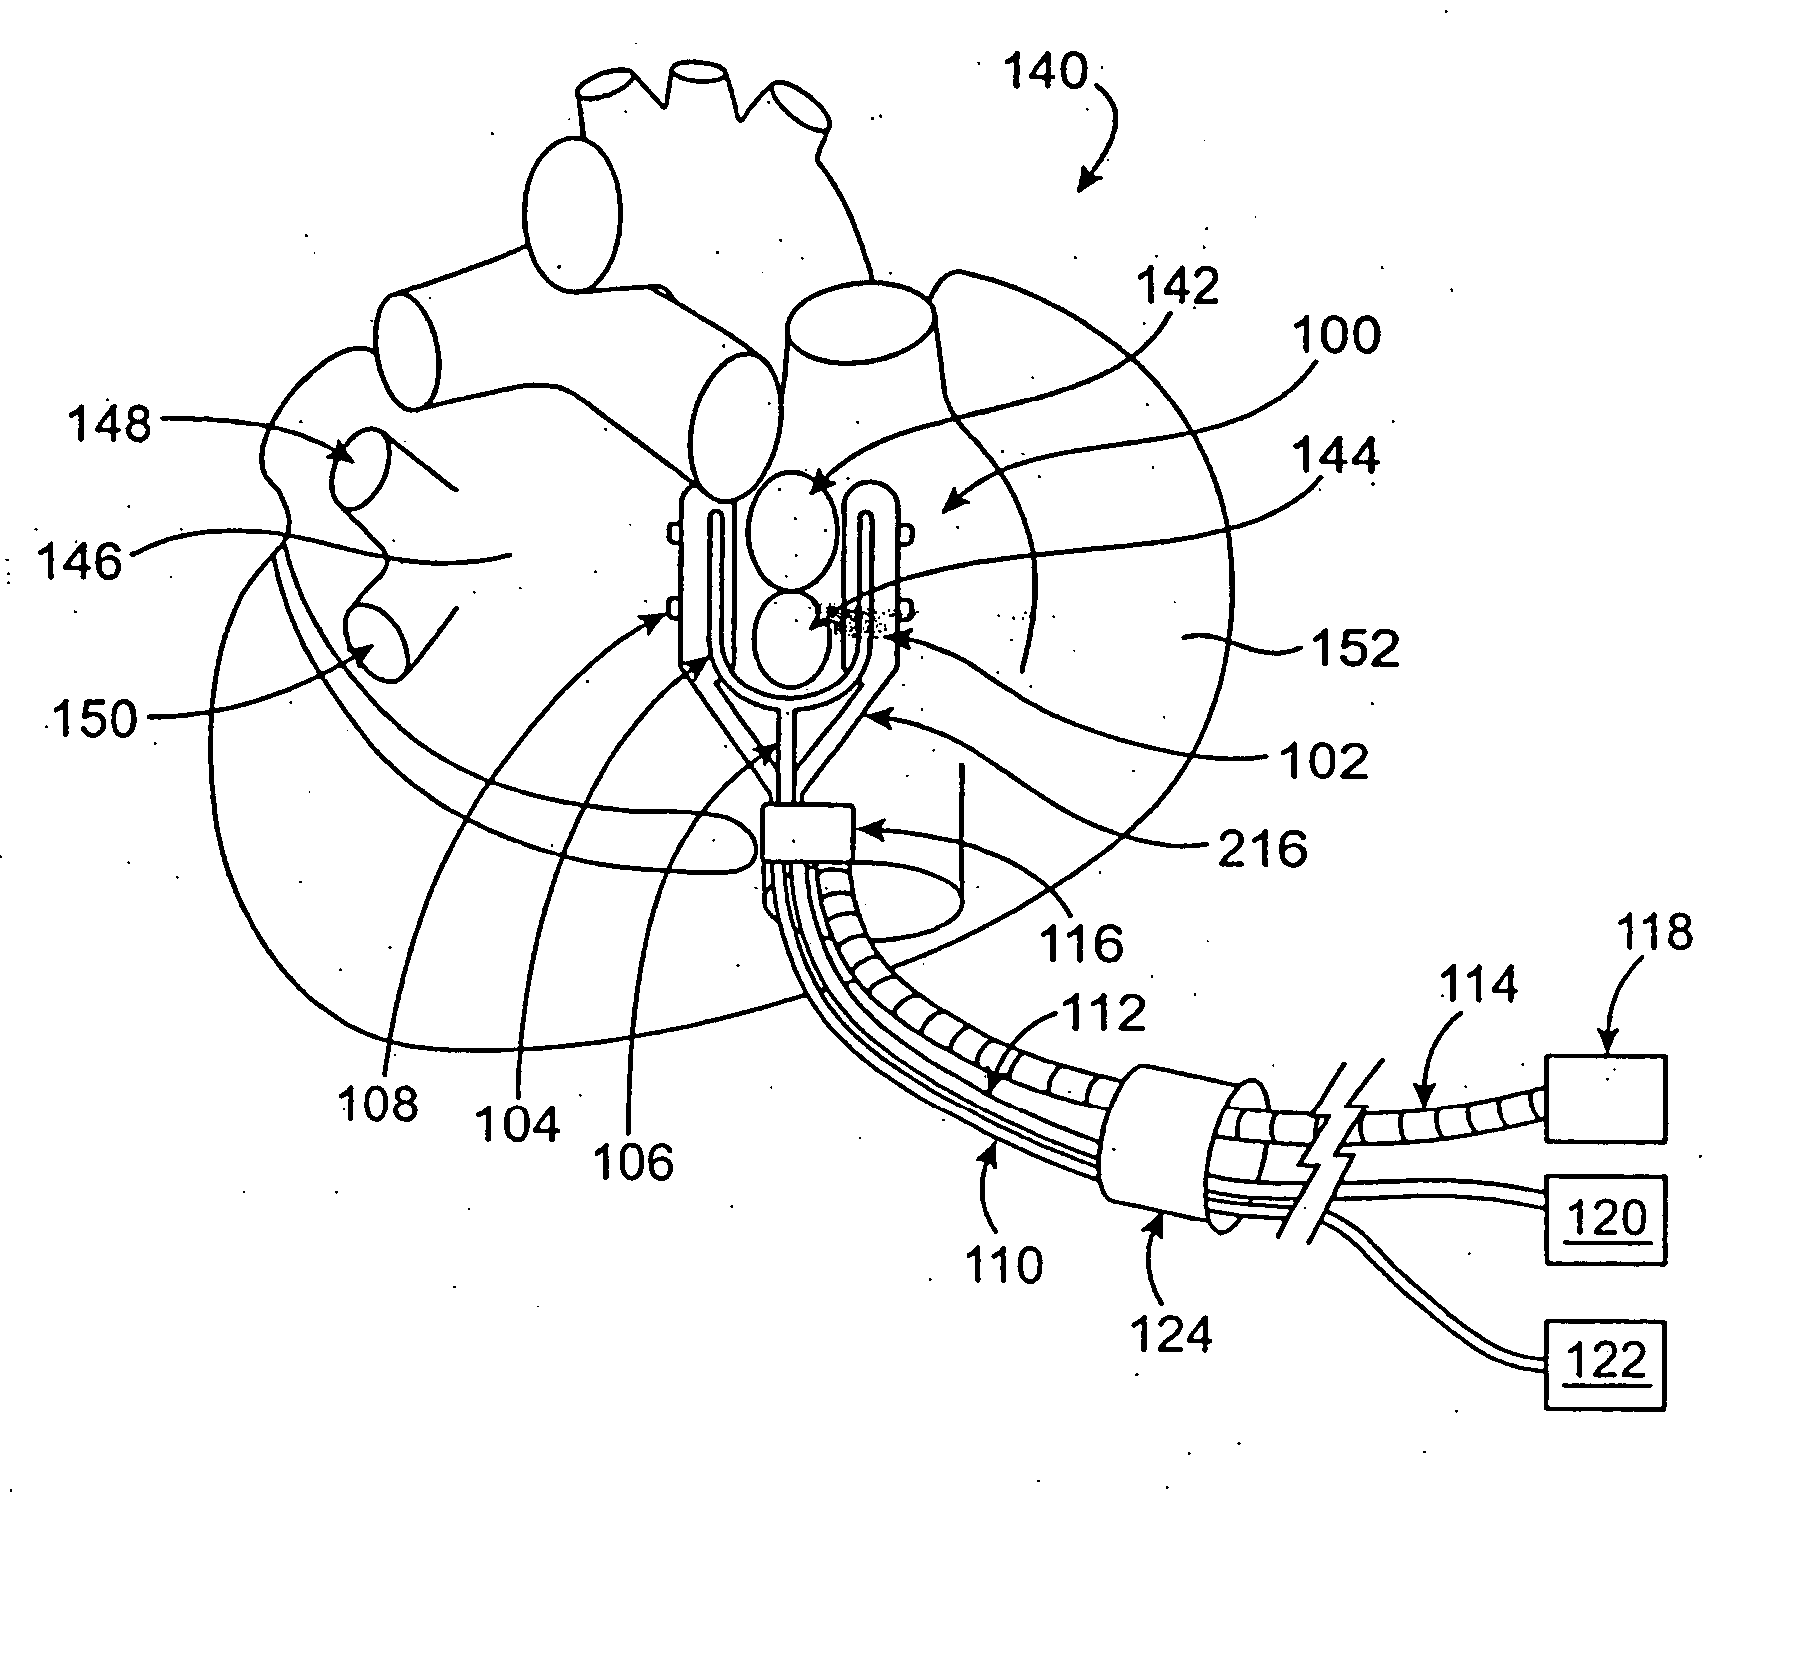 Cardiac ablation devices and methods